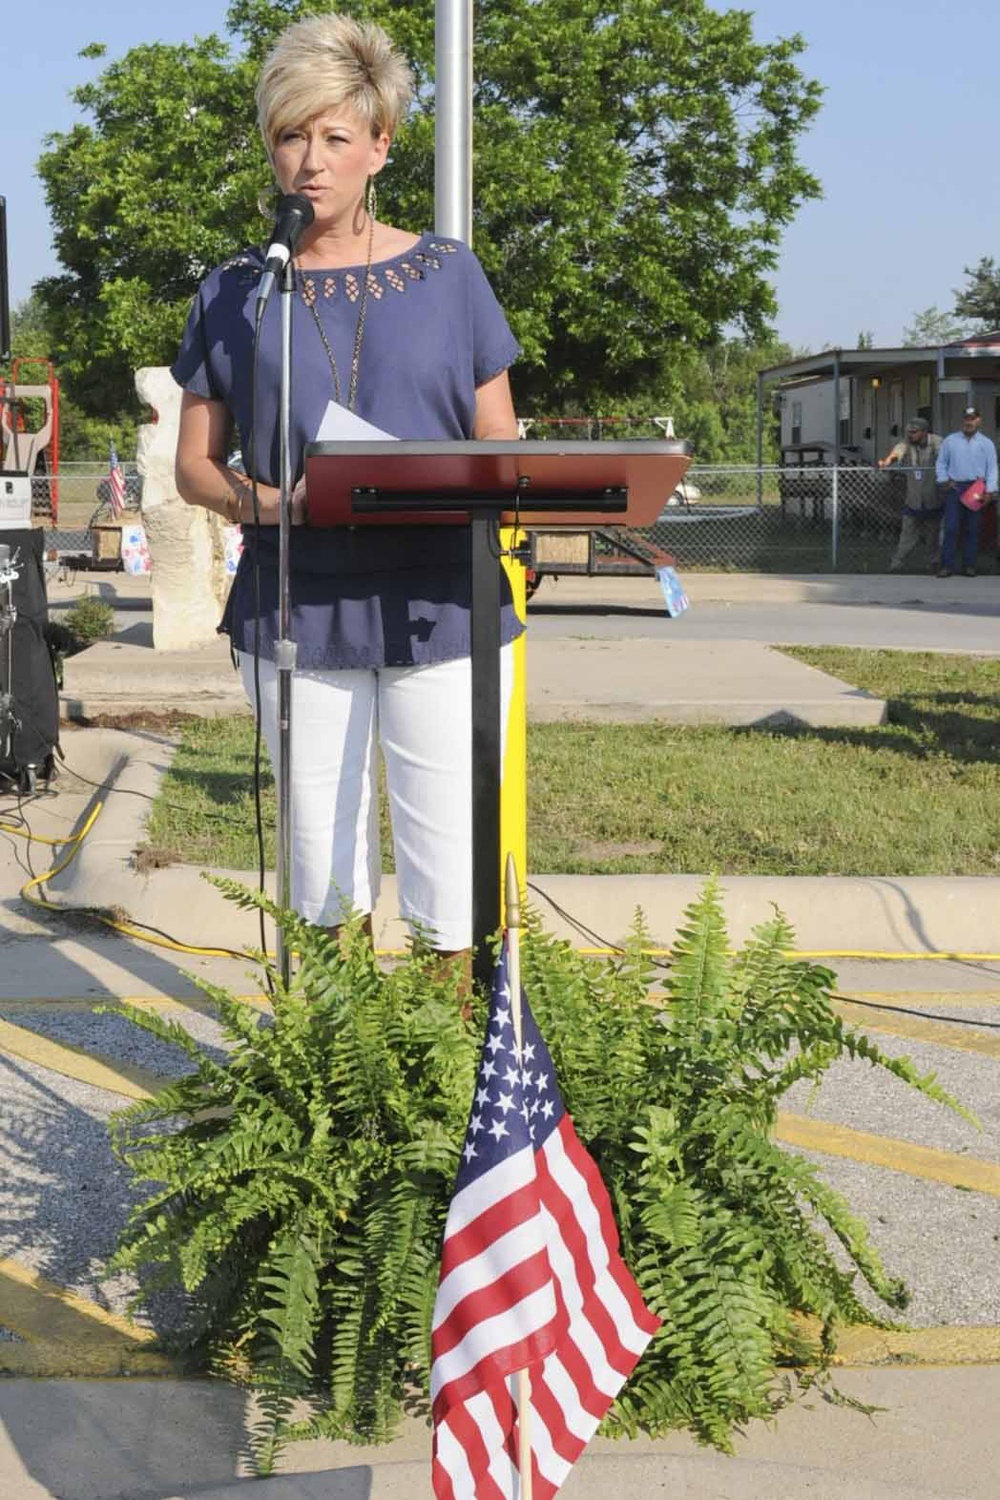 ‘Warhorse’ and Miller Heights Elementary celebrate “Proud to be an American Day”